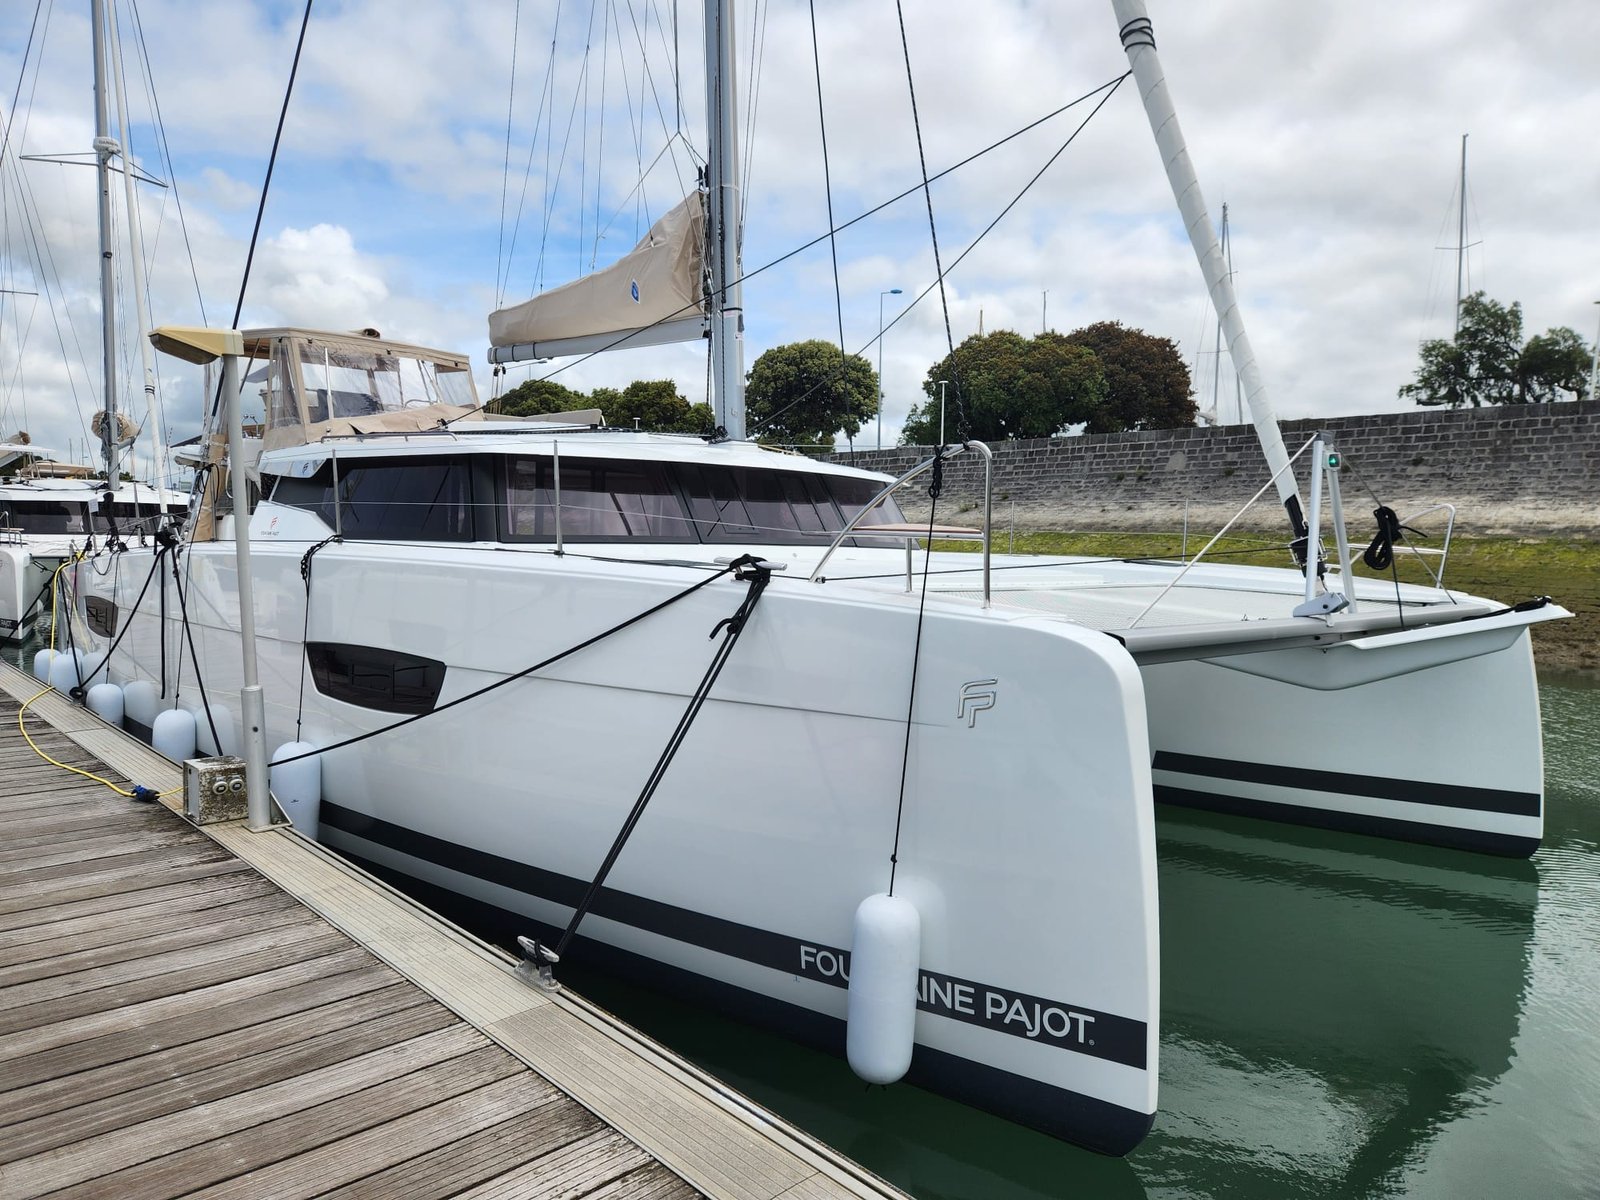 Fontaine Pajot Tanne delivered by Yacht Delivery Solutions https://yachtdeliverysolutions.com/